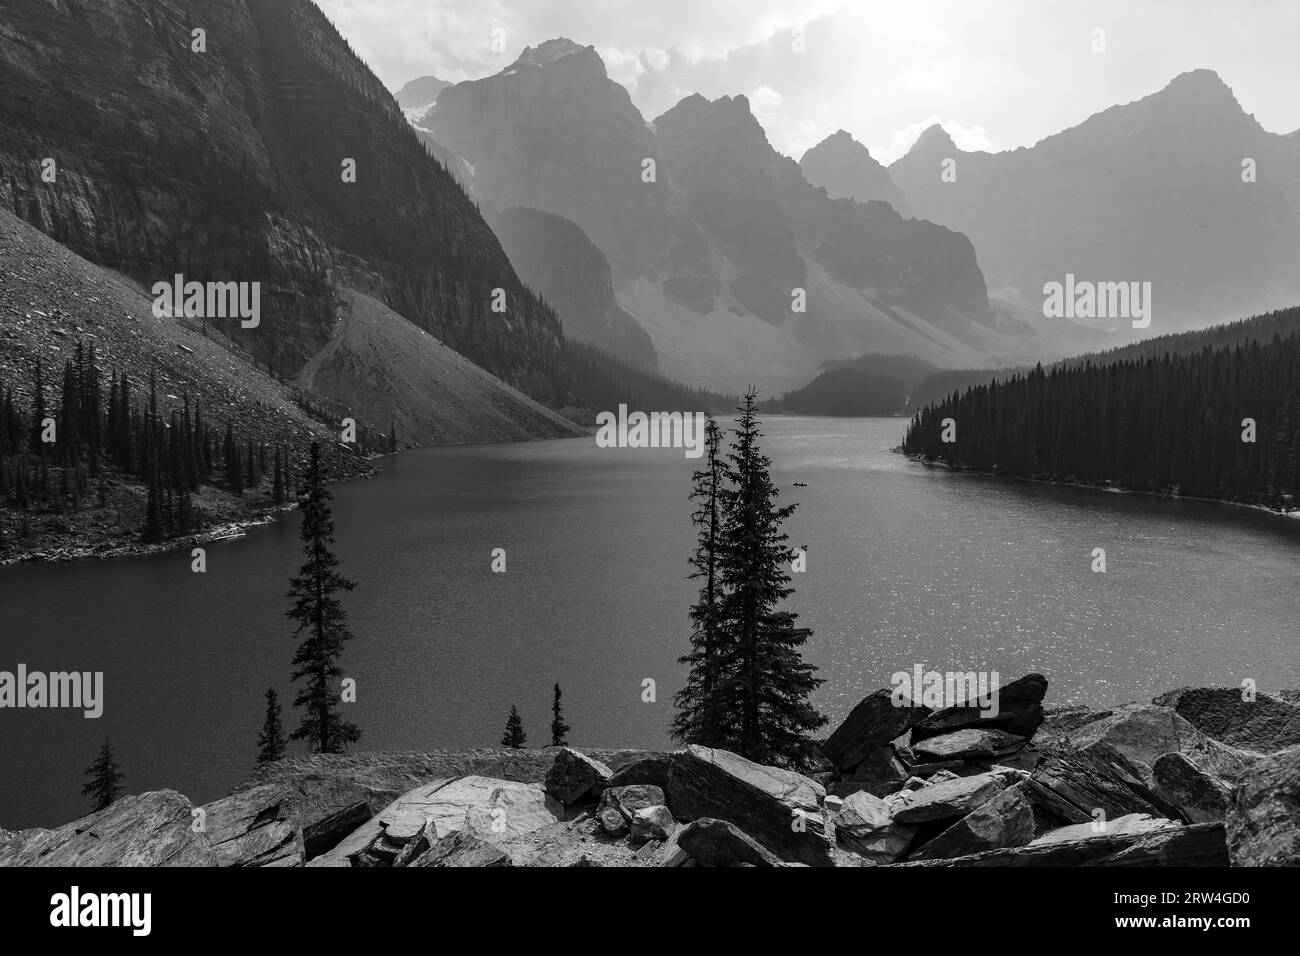 Moraine Lake and Valley of Ten Peaks in black and white, Banff national park, Canada. Stock Photo